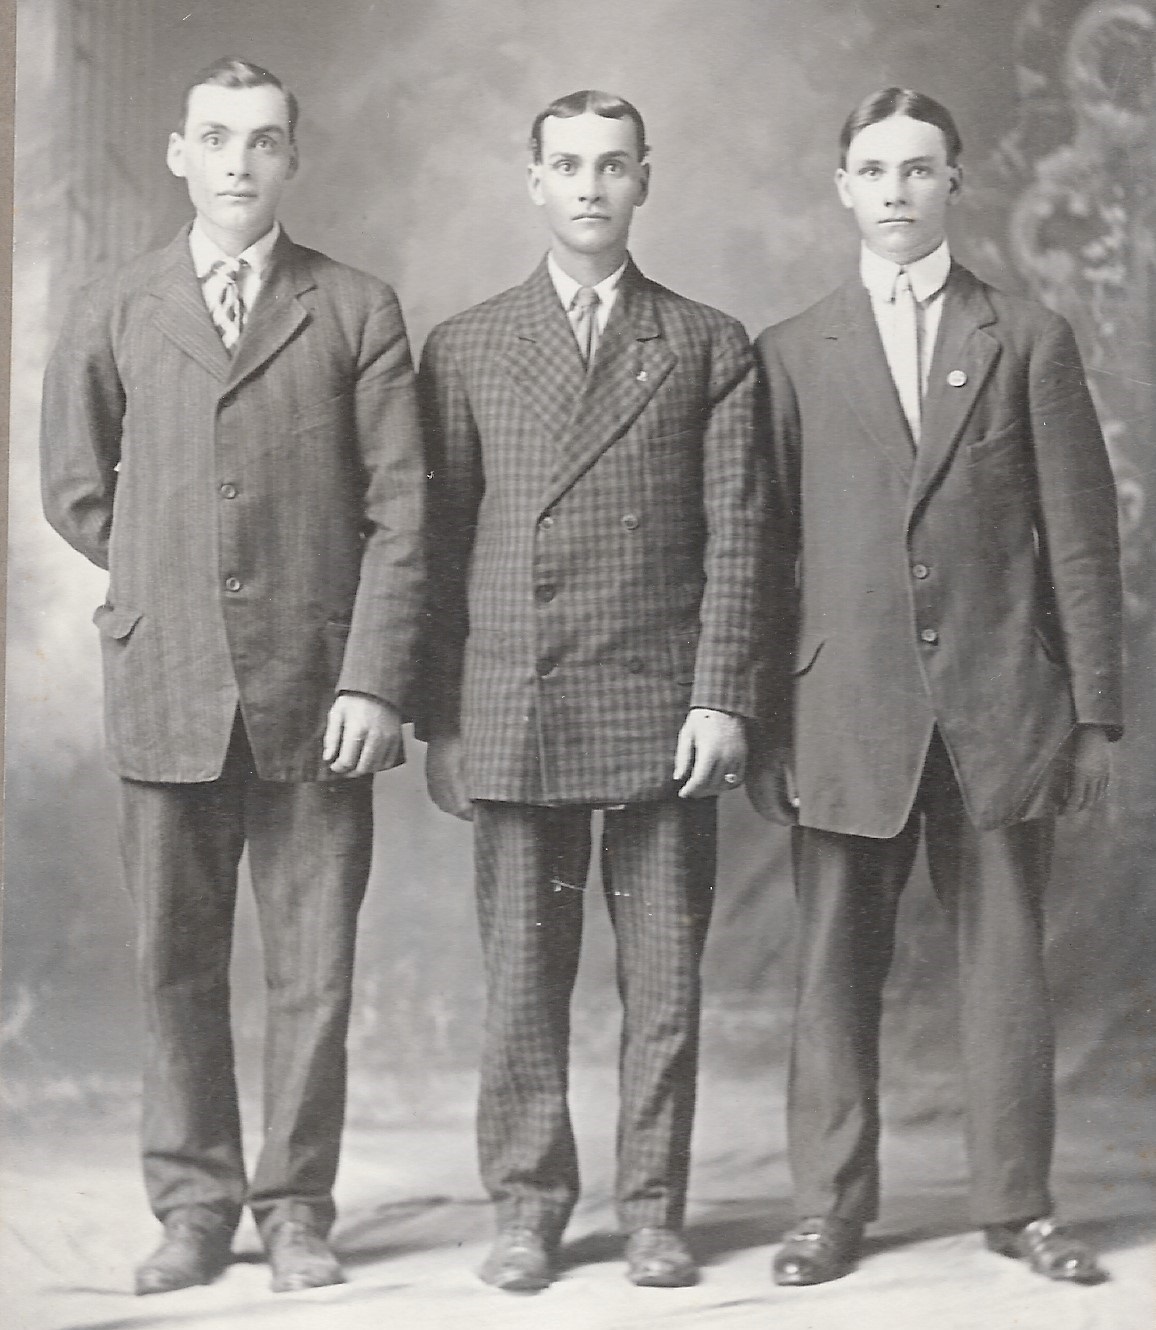 The Lucas Countyan: More of the Lenigs & Ben Lenig's suits